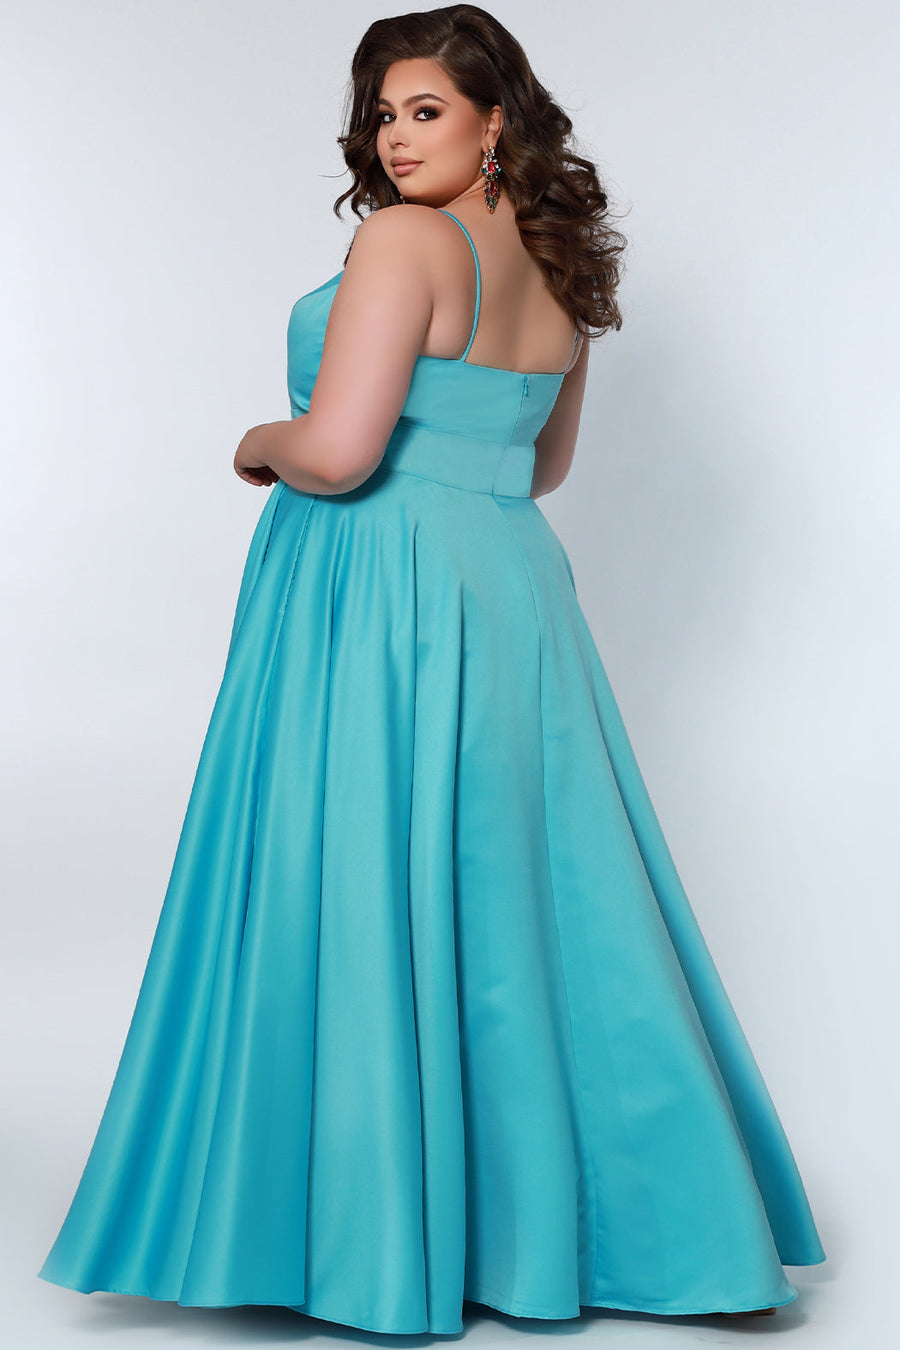 Tease Prom TE2209 Back view Plus size satin  a-line dress in sky blue with spaghetti straps, a deep v-neckline and a slit.